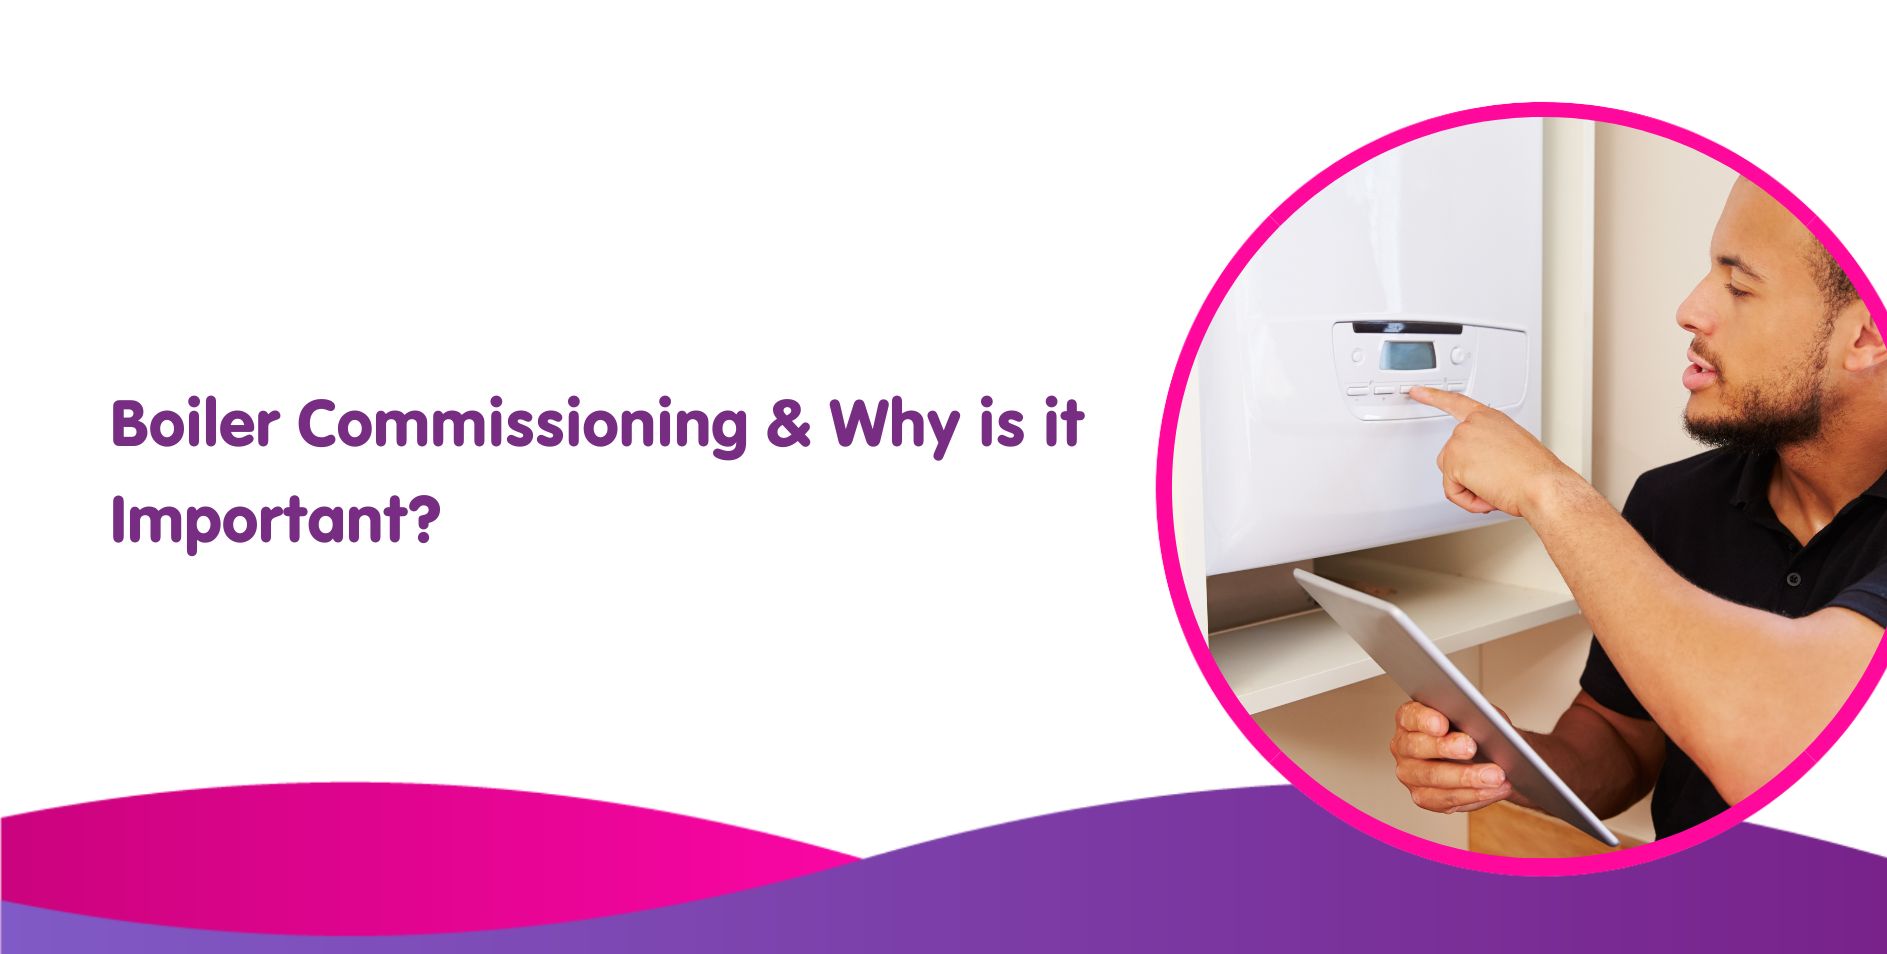 What is Boiler Commissioning?